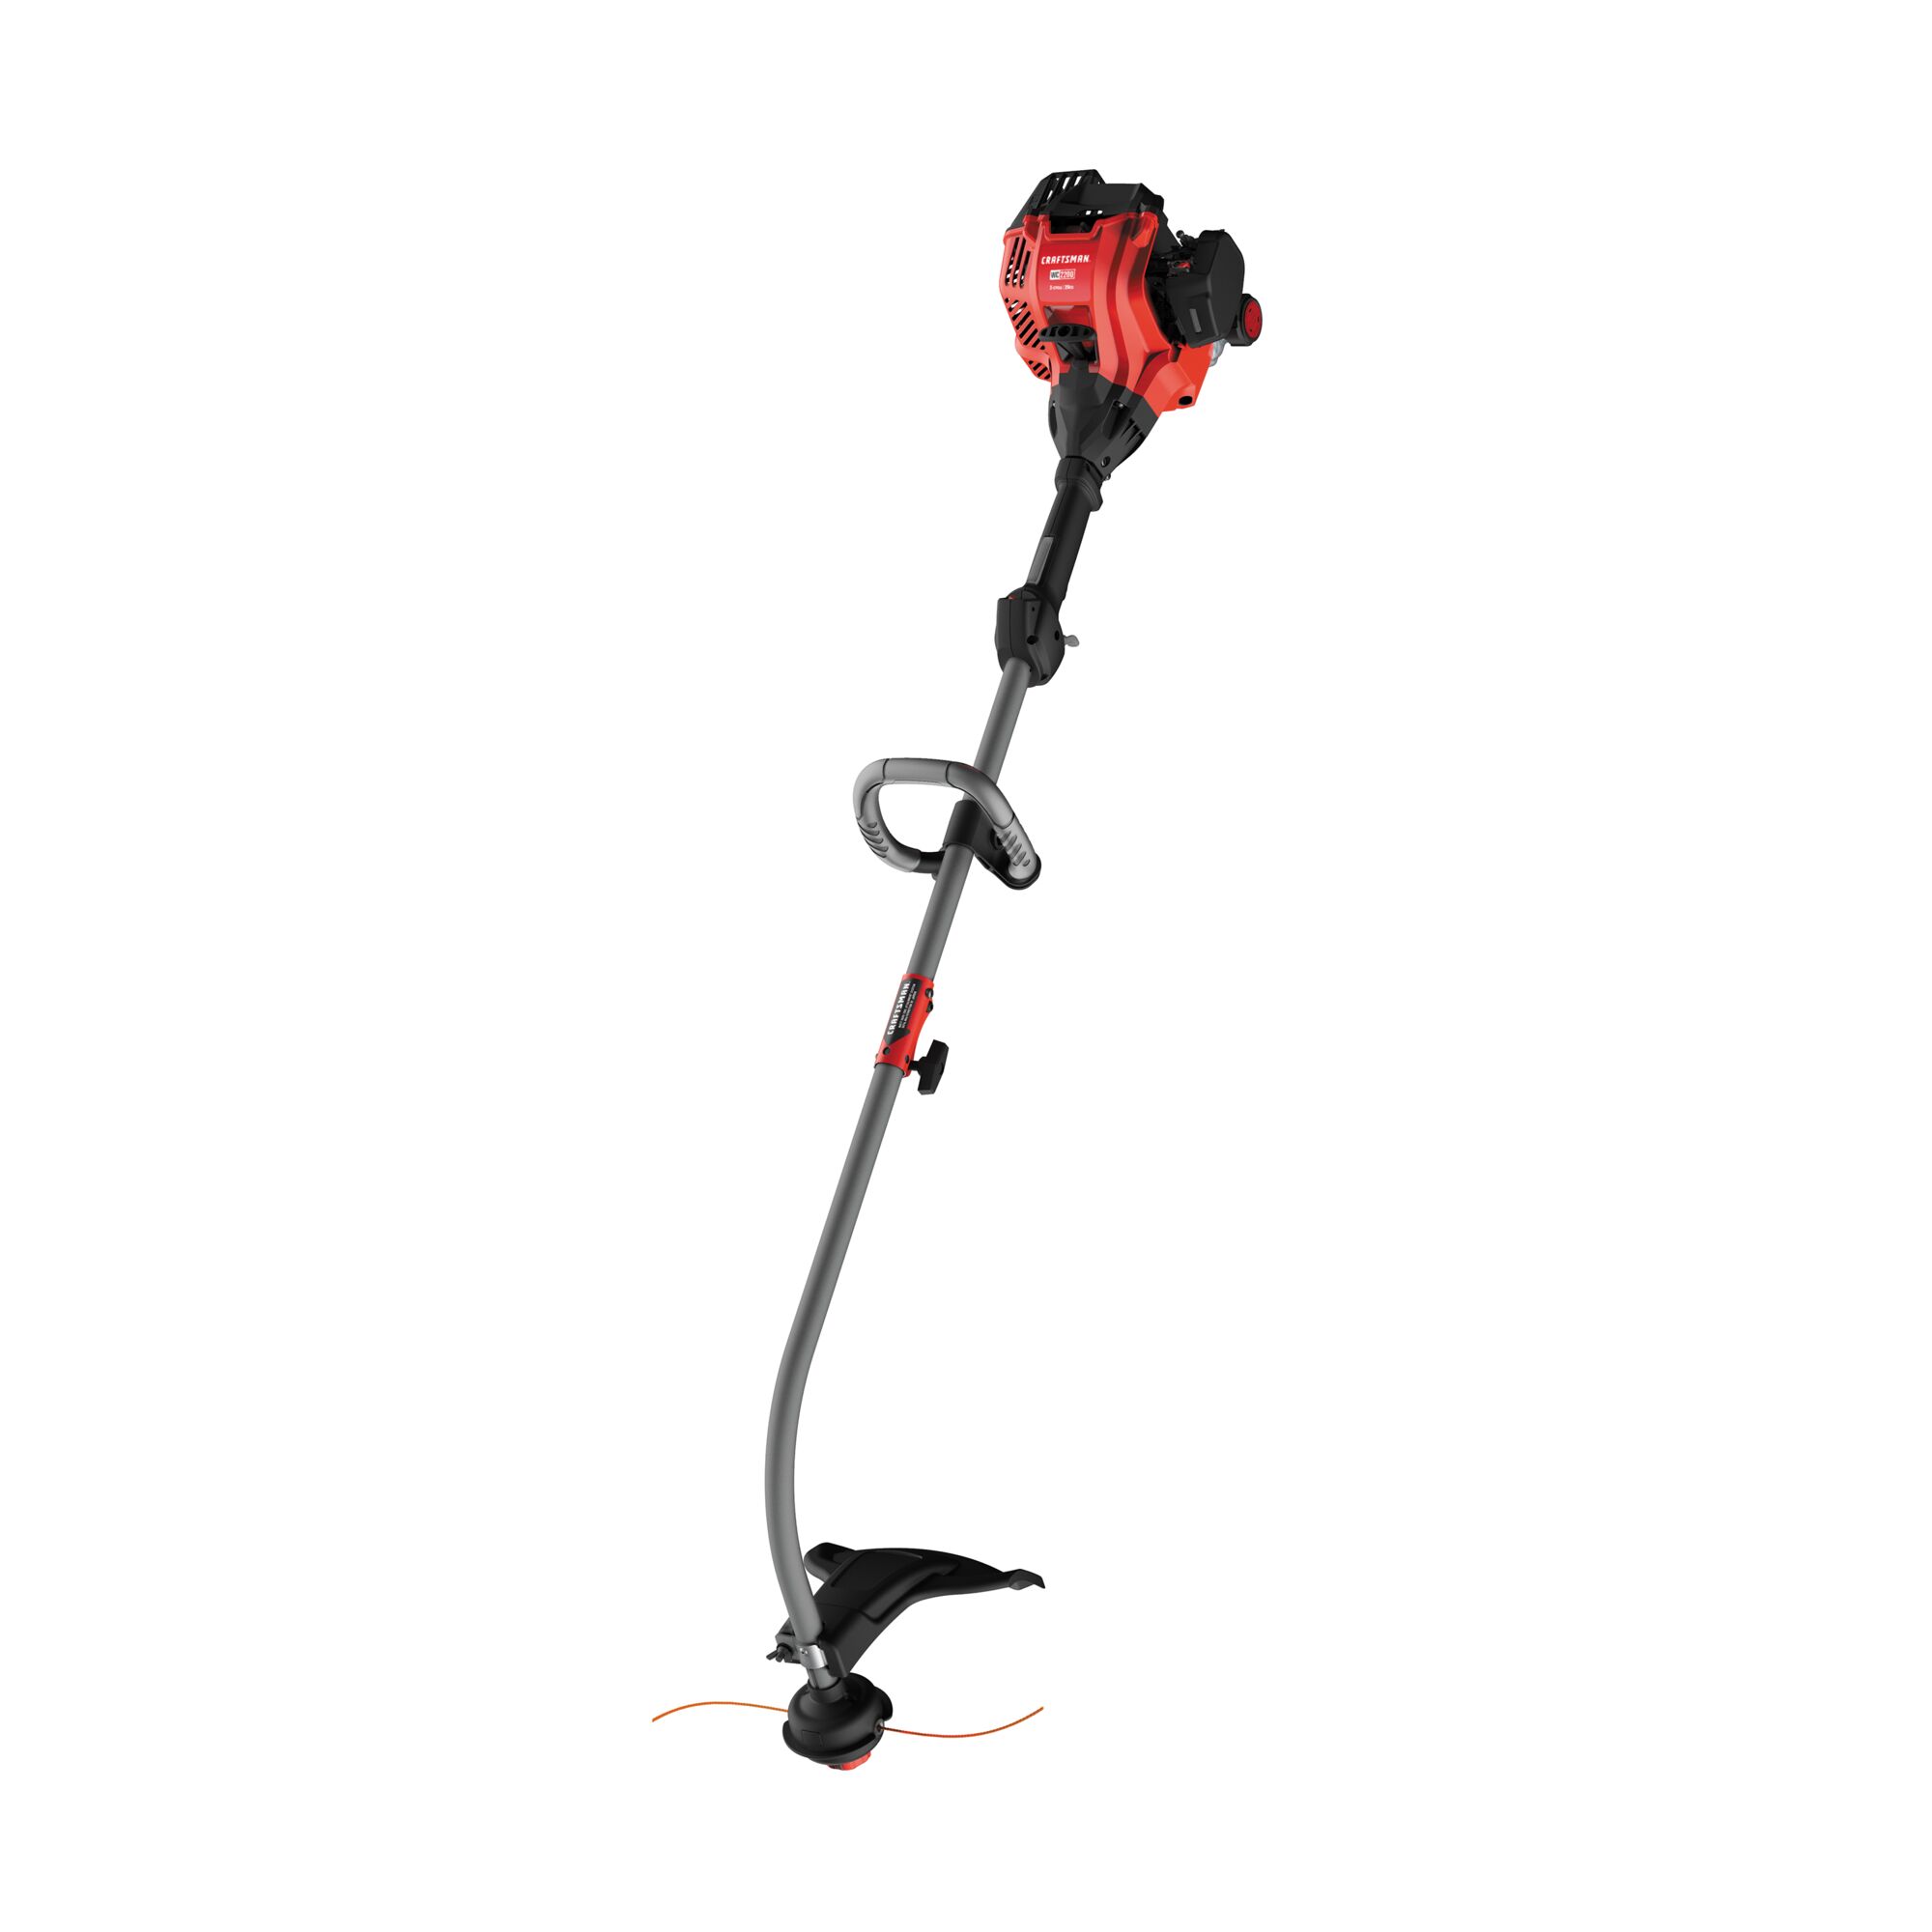 Right profile of W C 2200 weedwacker 25 C C 2 cycle 17 inch attachment capable curved shaft gas trimmer.